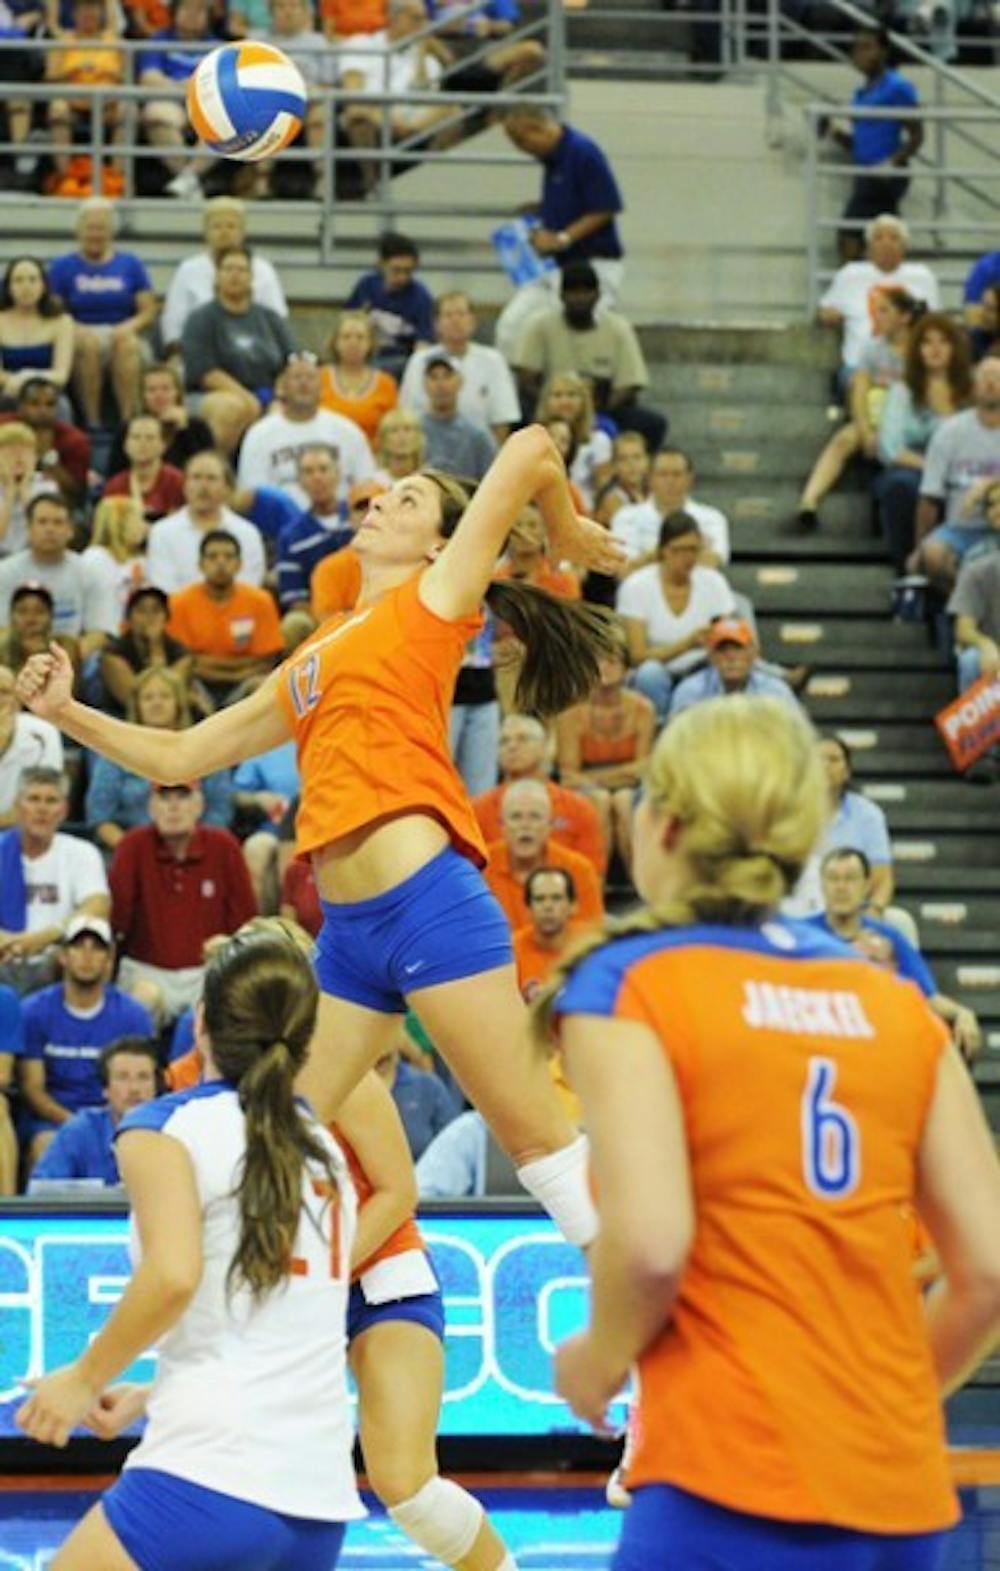 <p>Senior setter Kelly Murphy, a first-team All-American, led UF with 337 kills last season and must keep her teammates focused.</p>